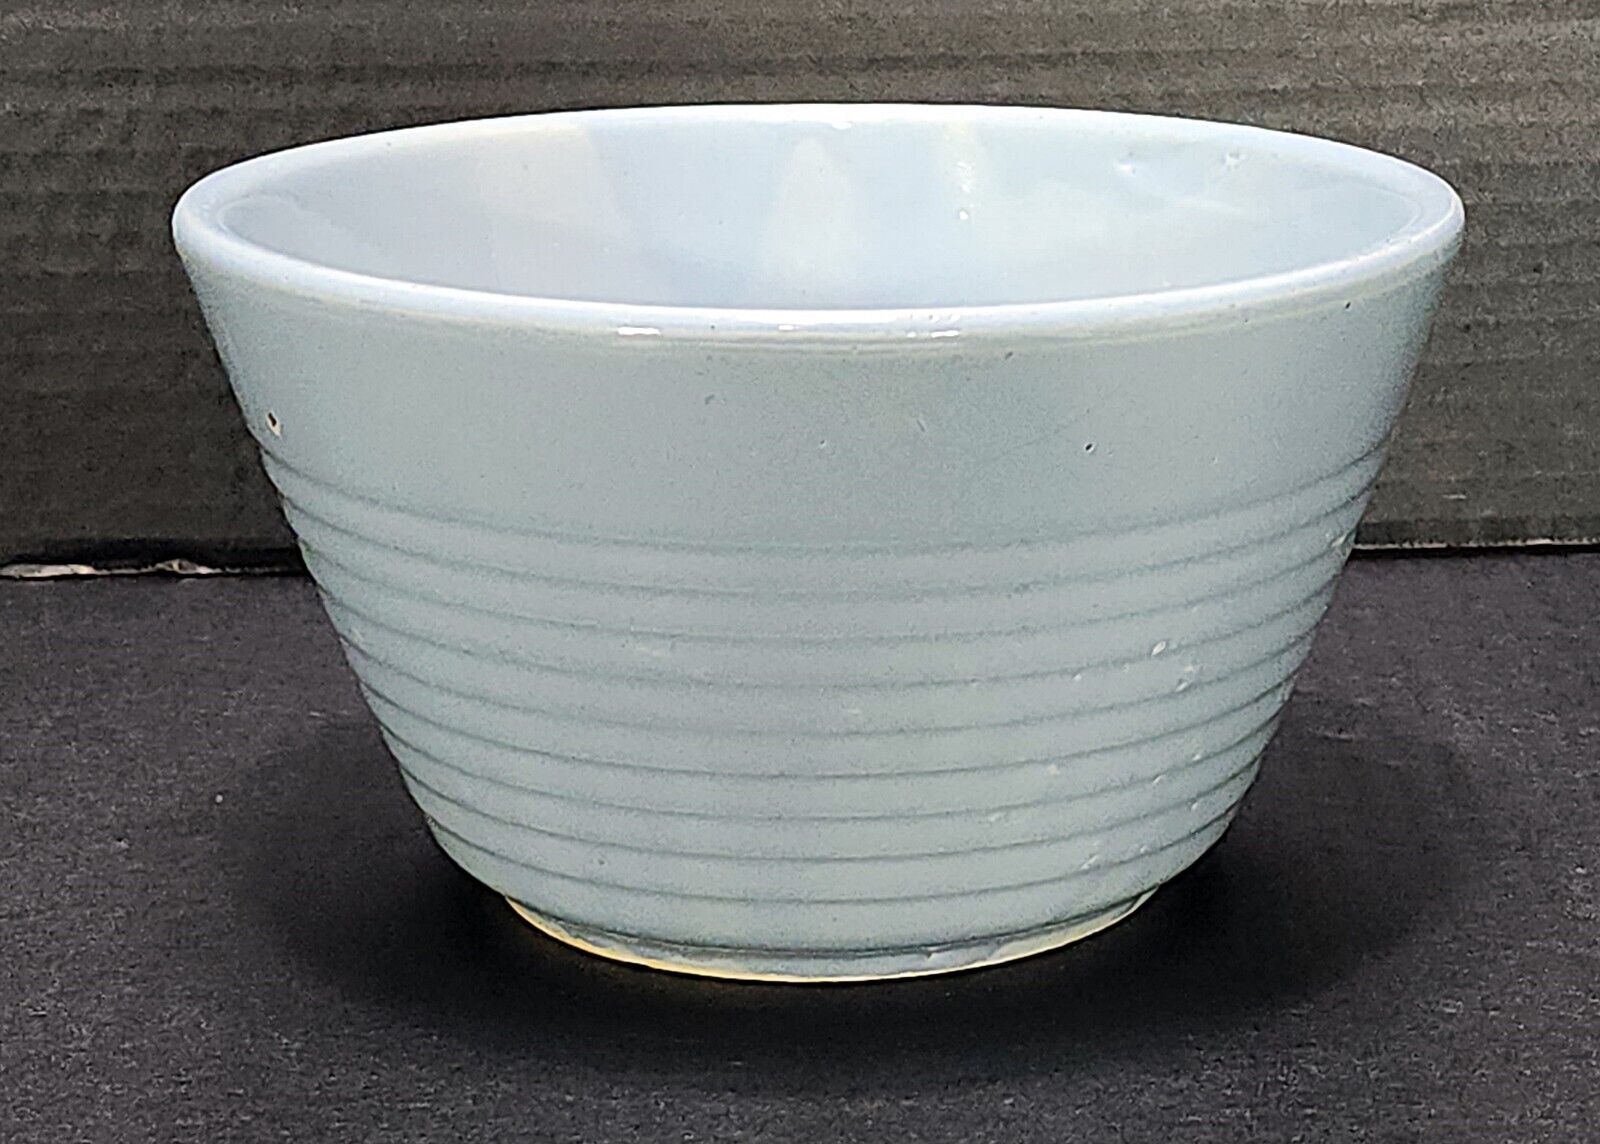 Vintage WATT Ribbed OVEN WARE MIXING BOWL #8 Light Blue Great Condition NICE